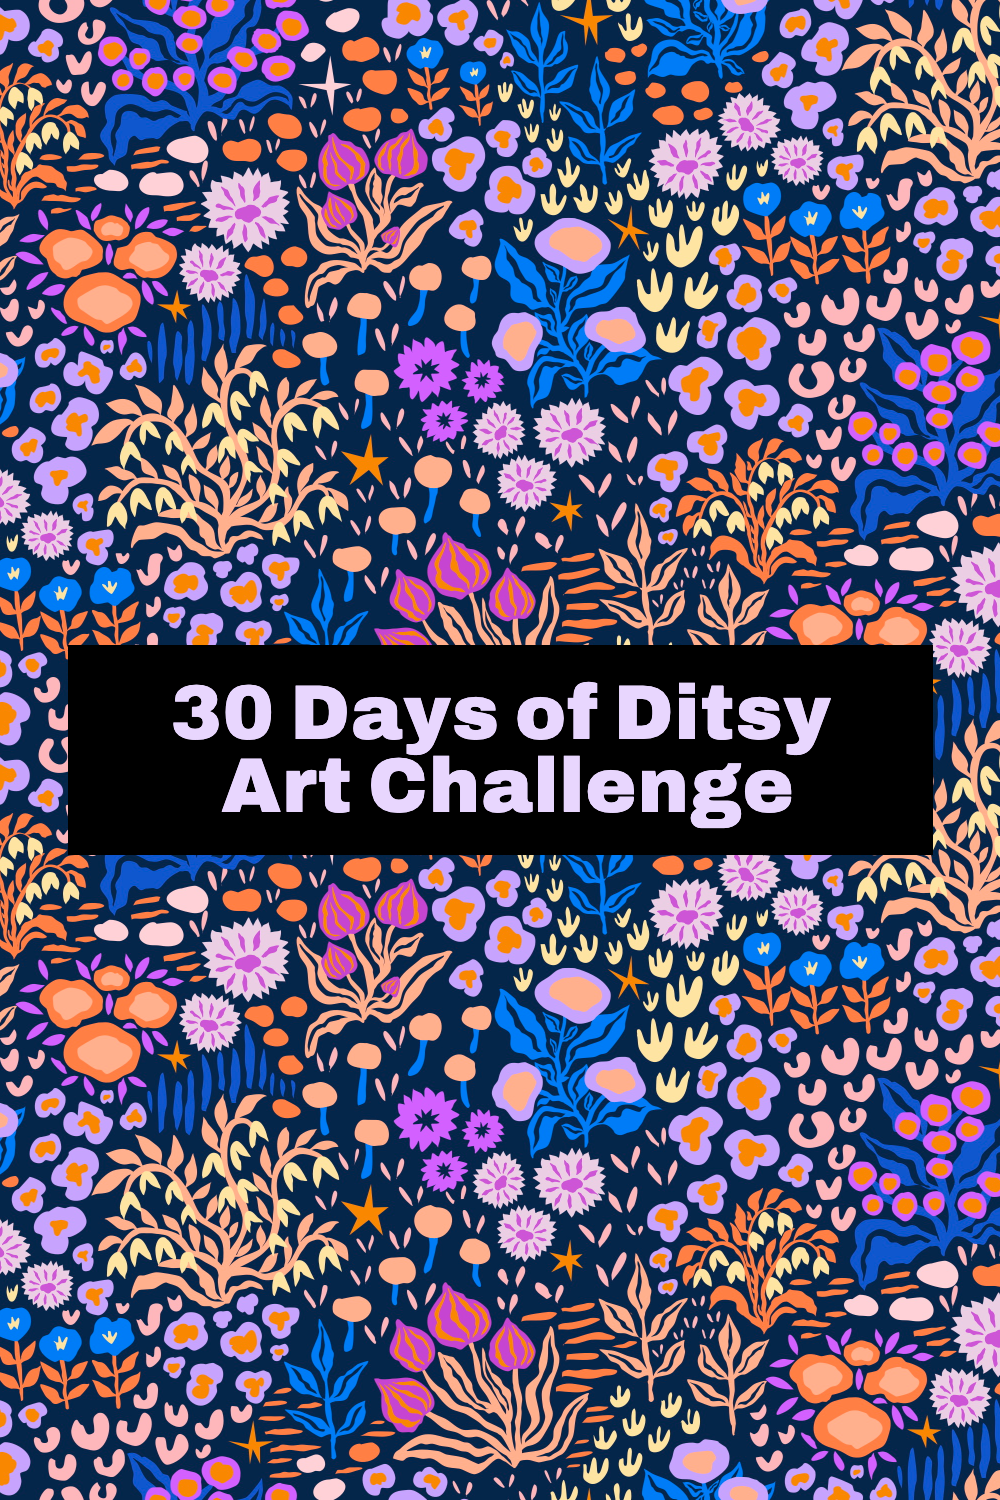 30-days-of-ditsy-art-challenge-pin-4.png